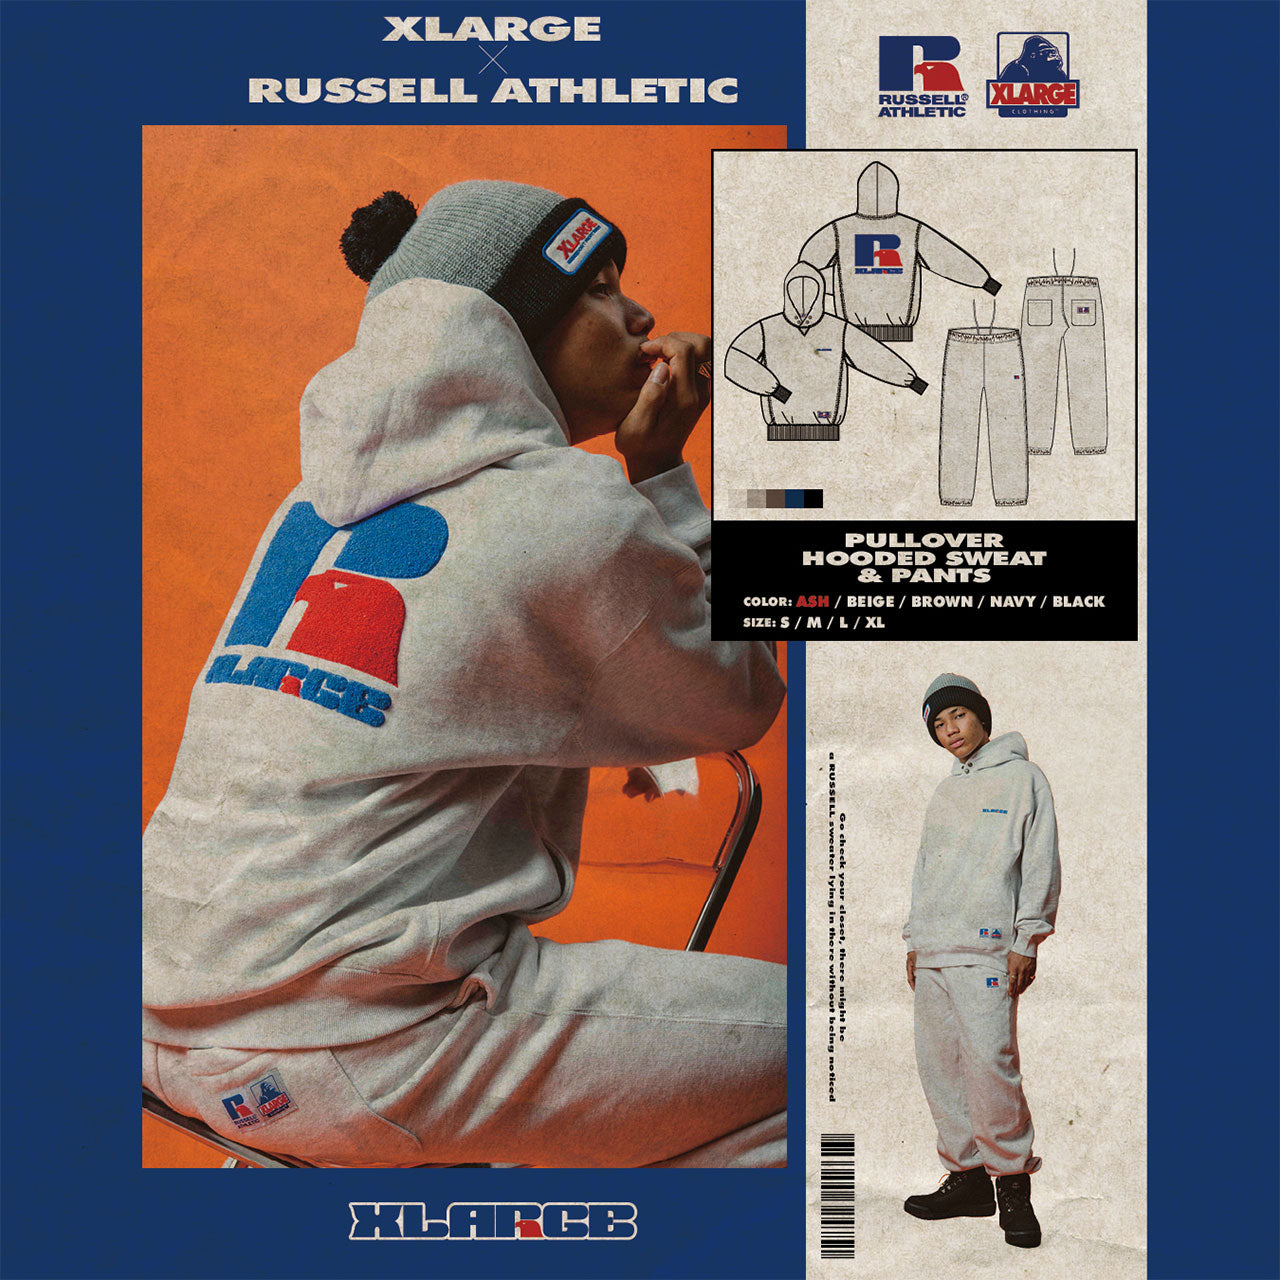 XLARGE×RUSSELL ATHLETIC